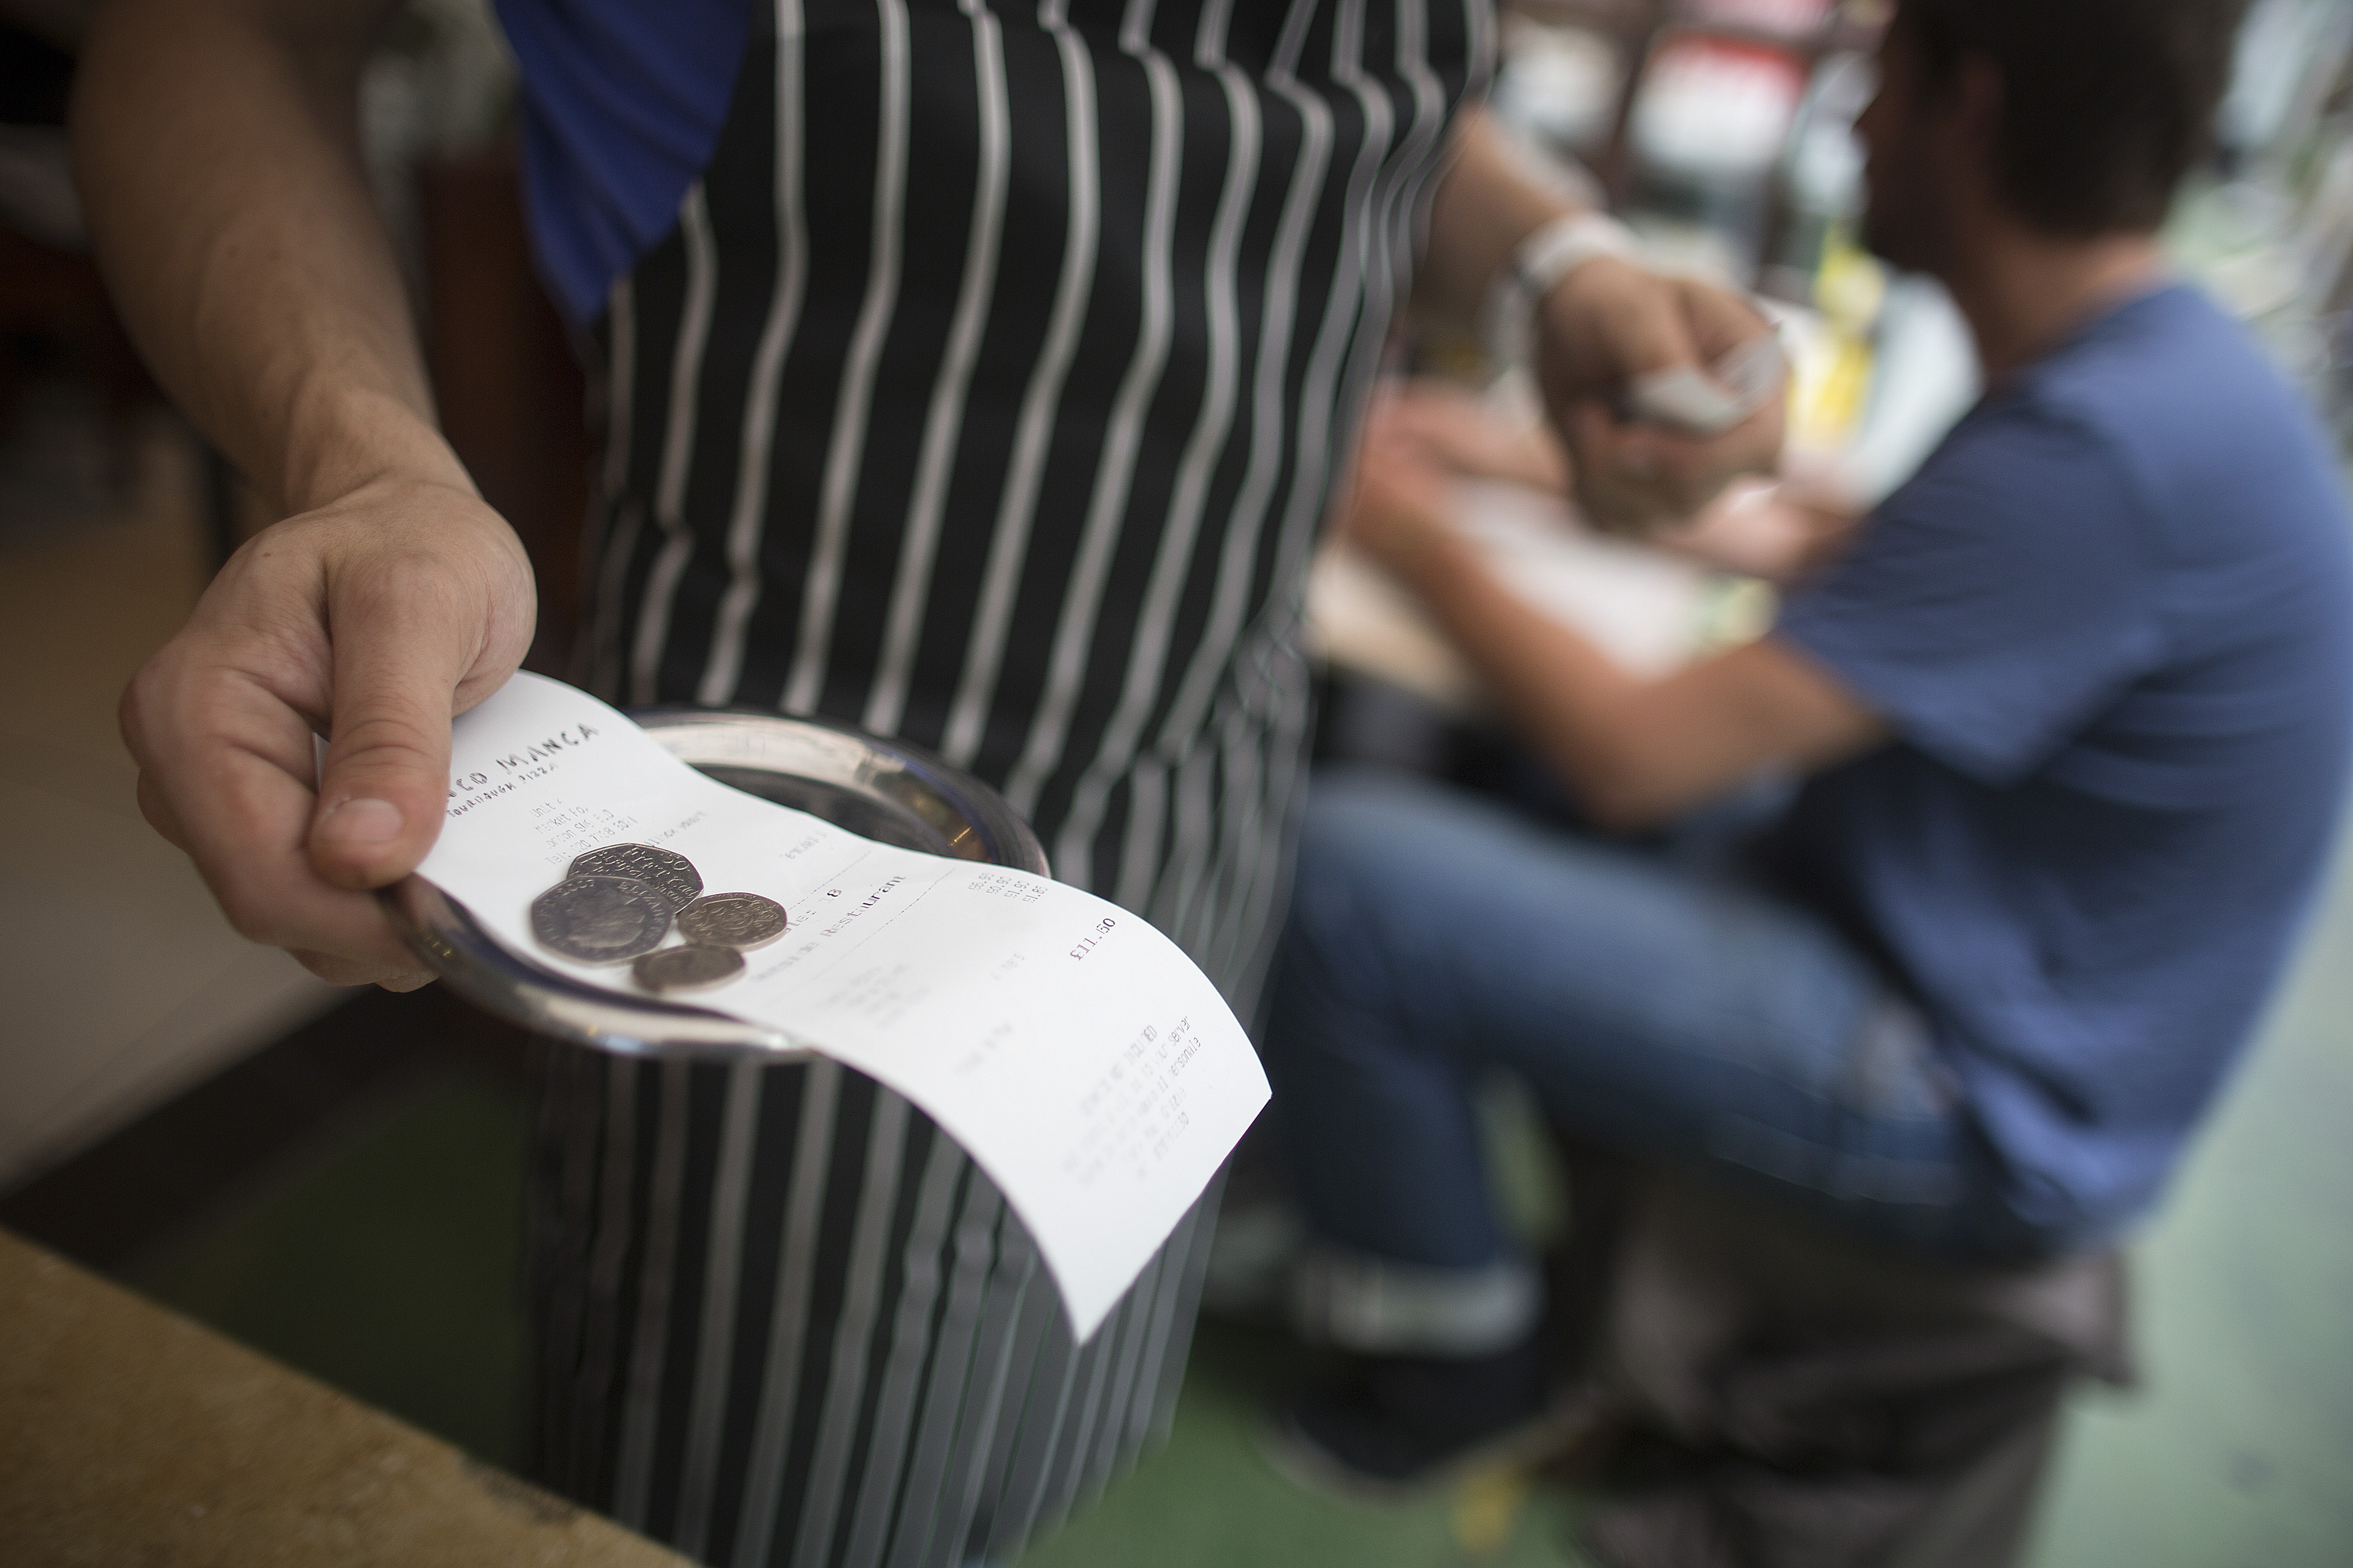 A receipt with a tip, in the form of coins, being carried away from a table by a waiter